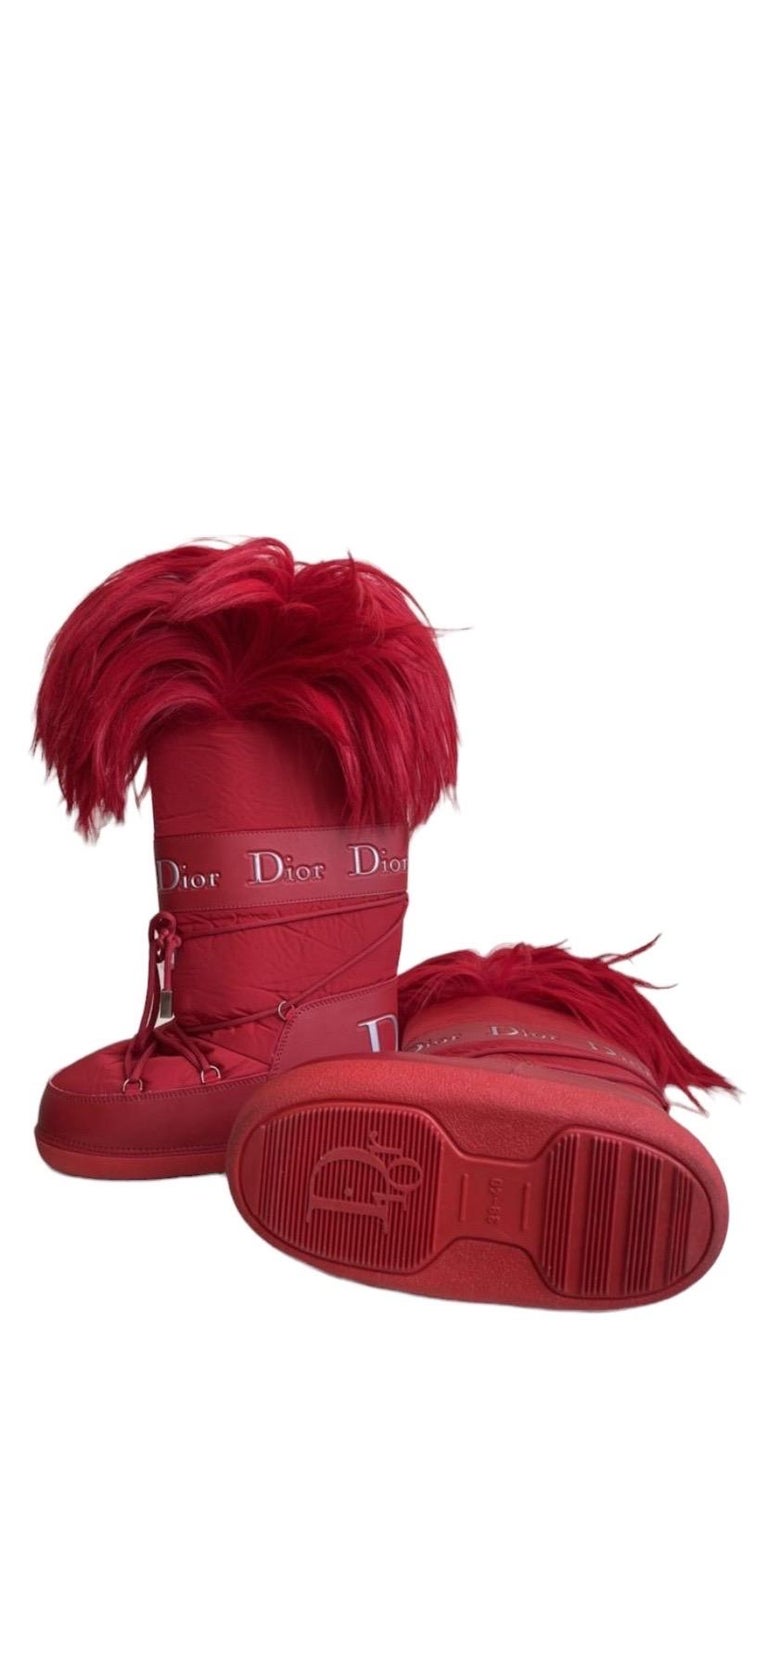 Dior, Shoes, Rare Christian Dior By John Galliano Archival Moon Boots  Space Age